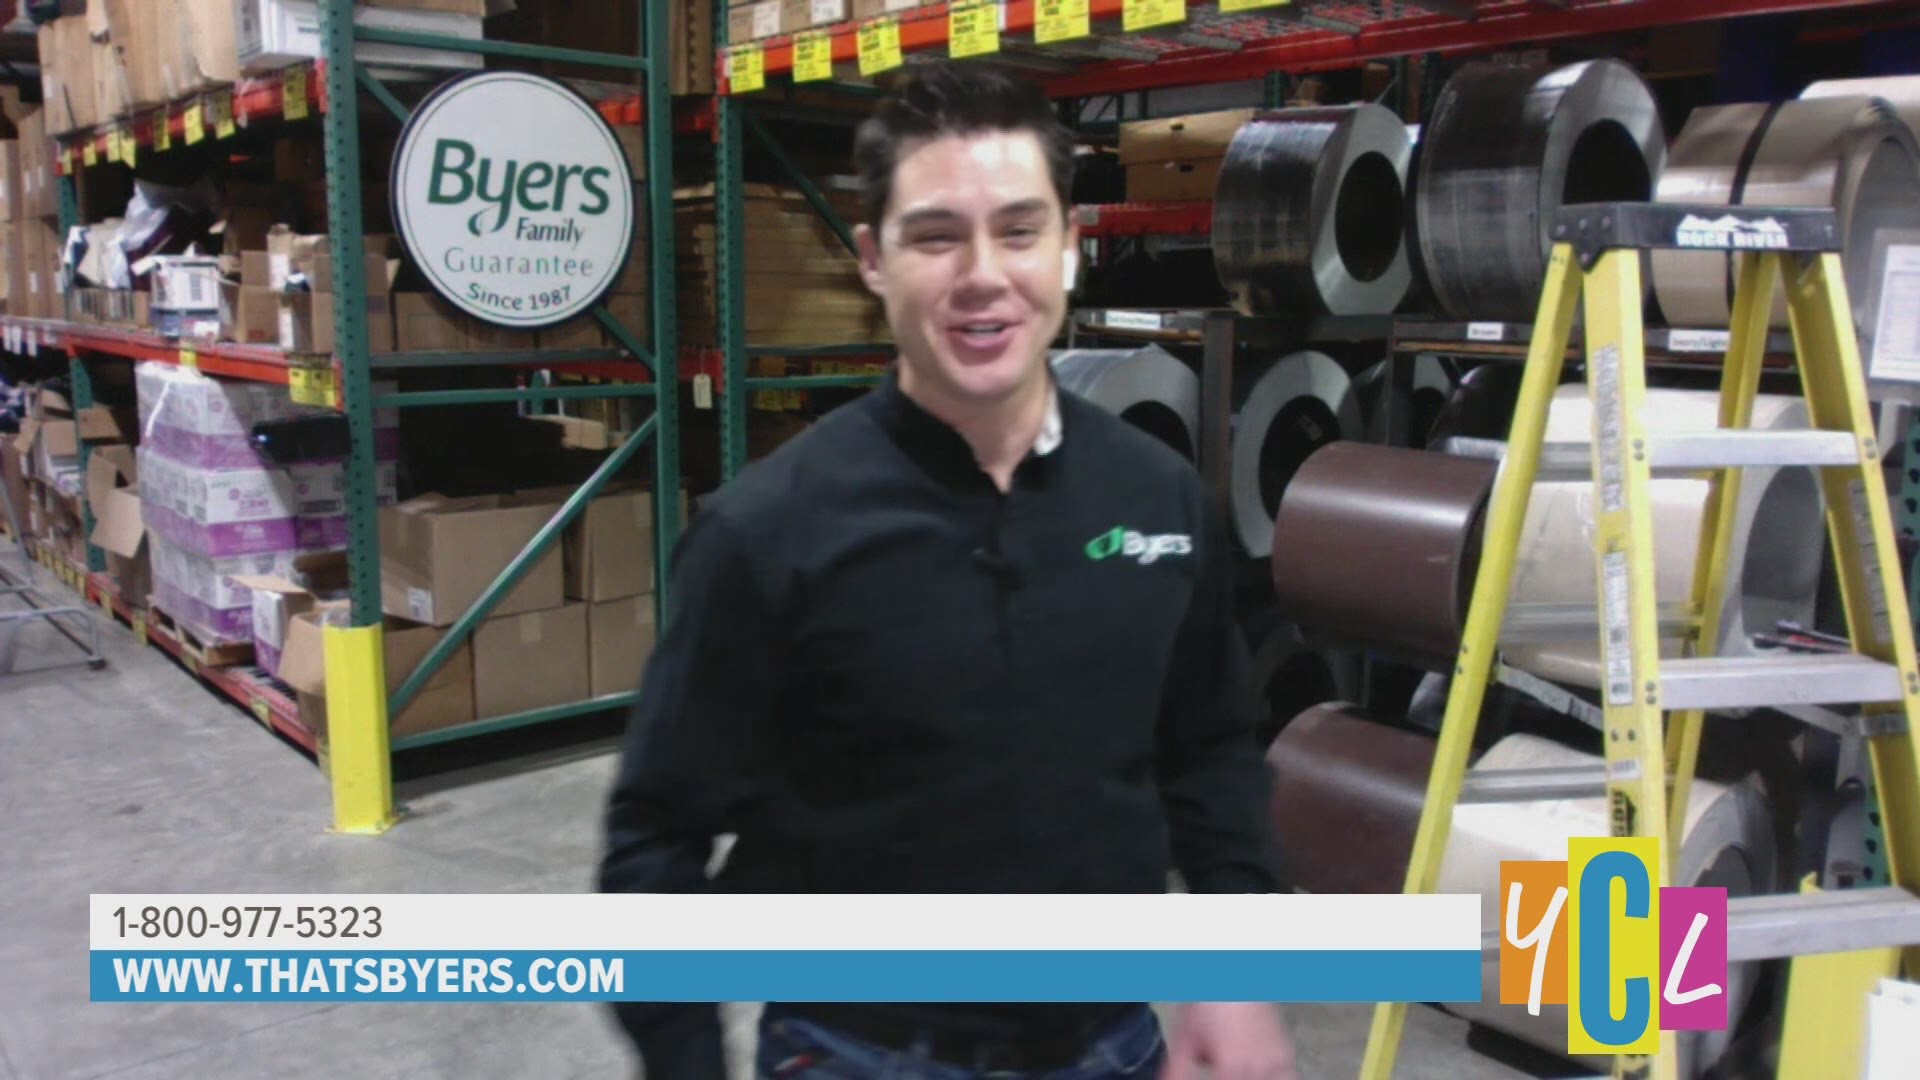 Byers offers industry leading products and installer training for it's home improvement services. This segment was paid for by Byers LeafGuard Gutters and Roofing.